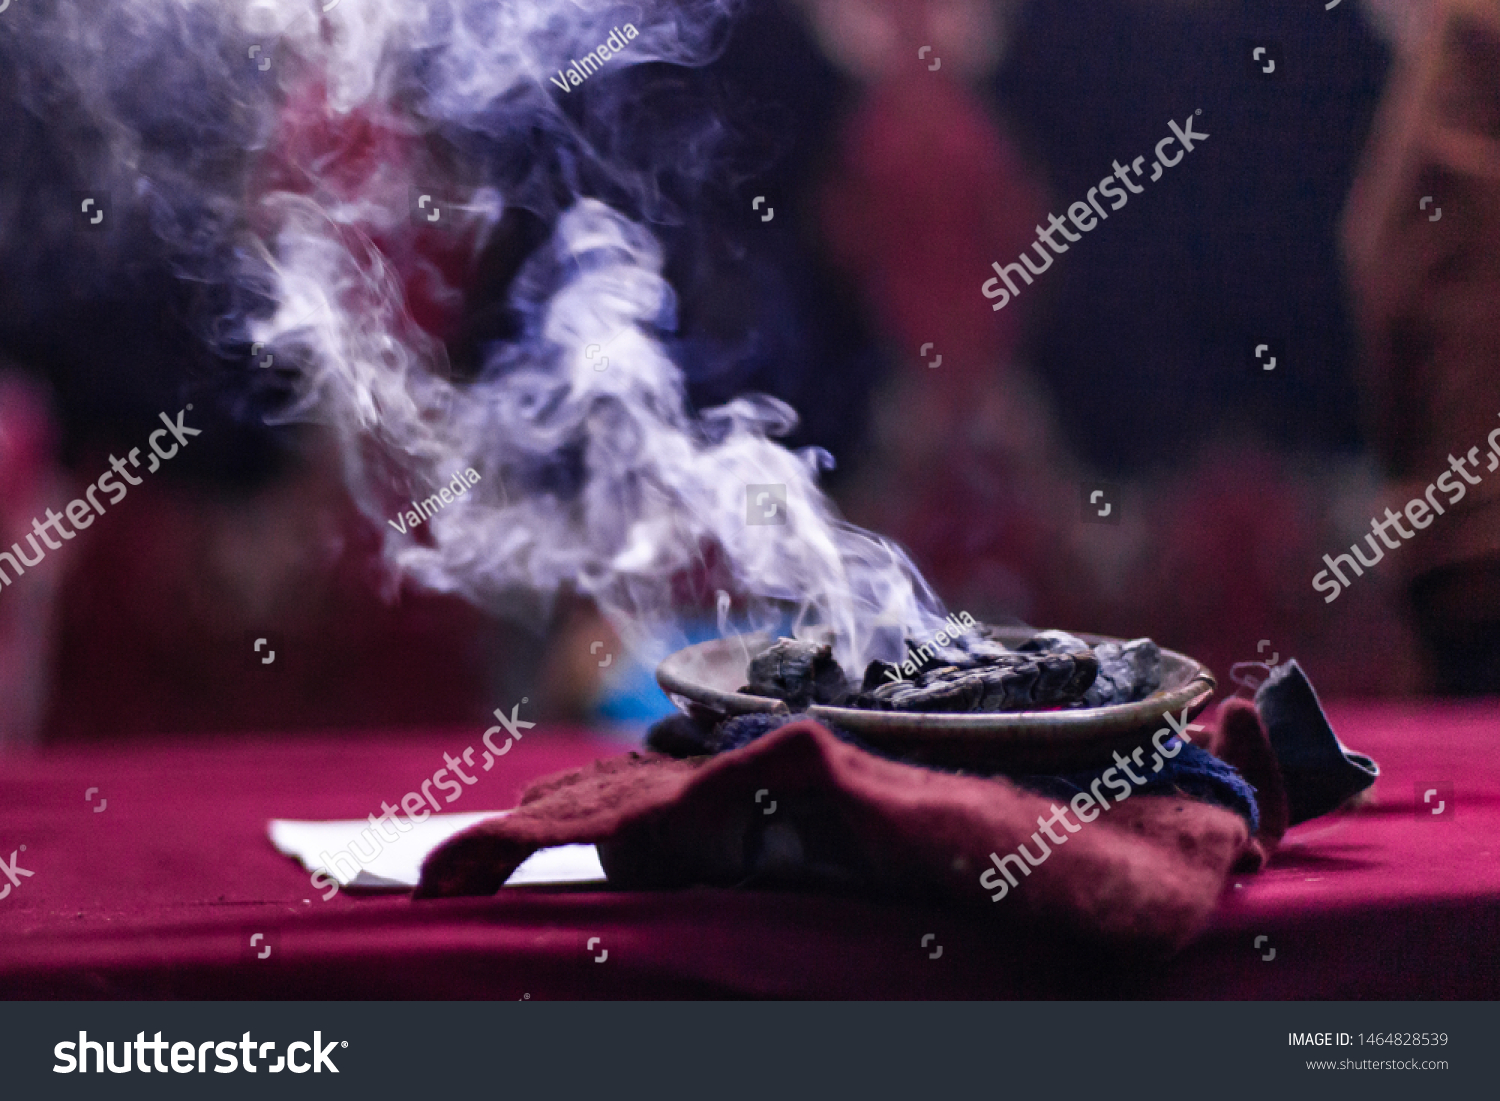 Fusion of cultural & modern music event. A close up view of embers smoking in a sacred dish during a festival of Native American cultures and traditions mystical object used by shaman, with copy space #1464828539